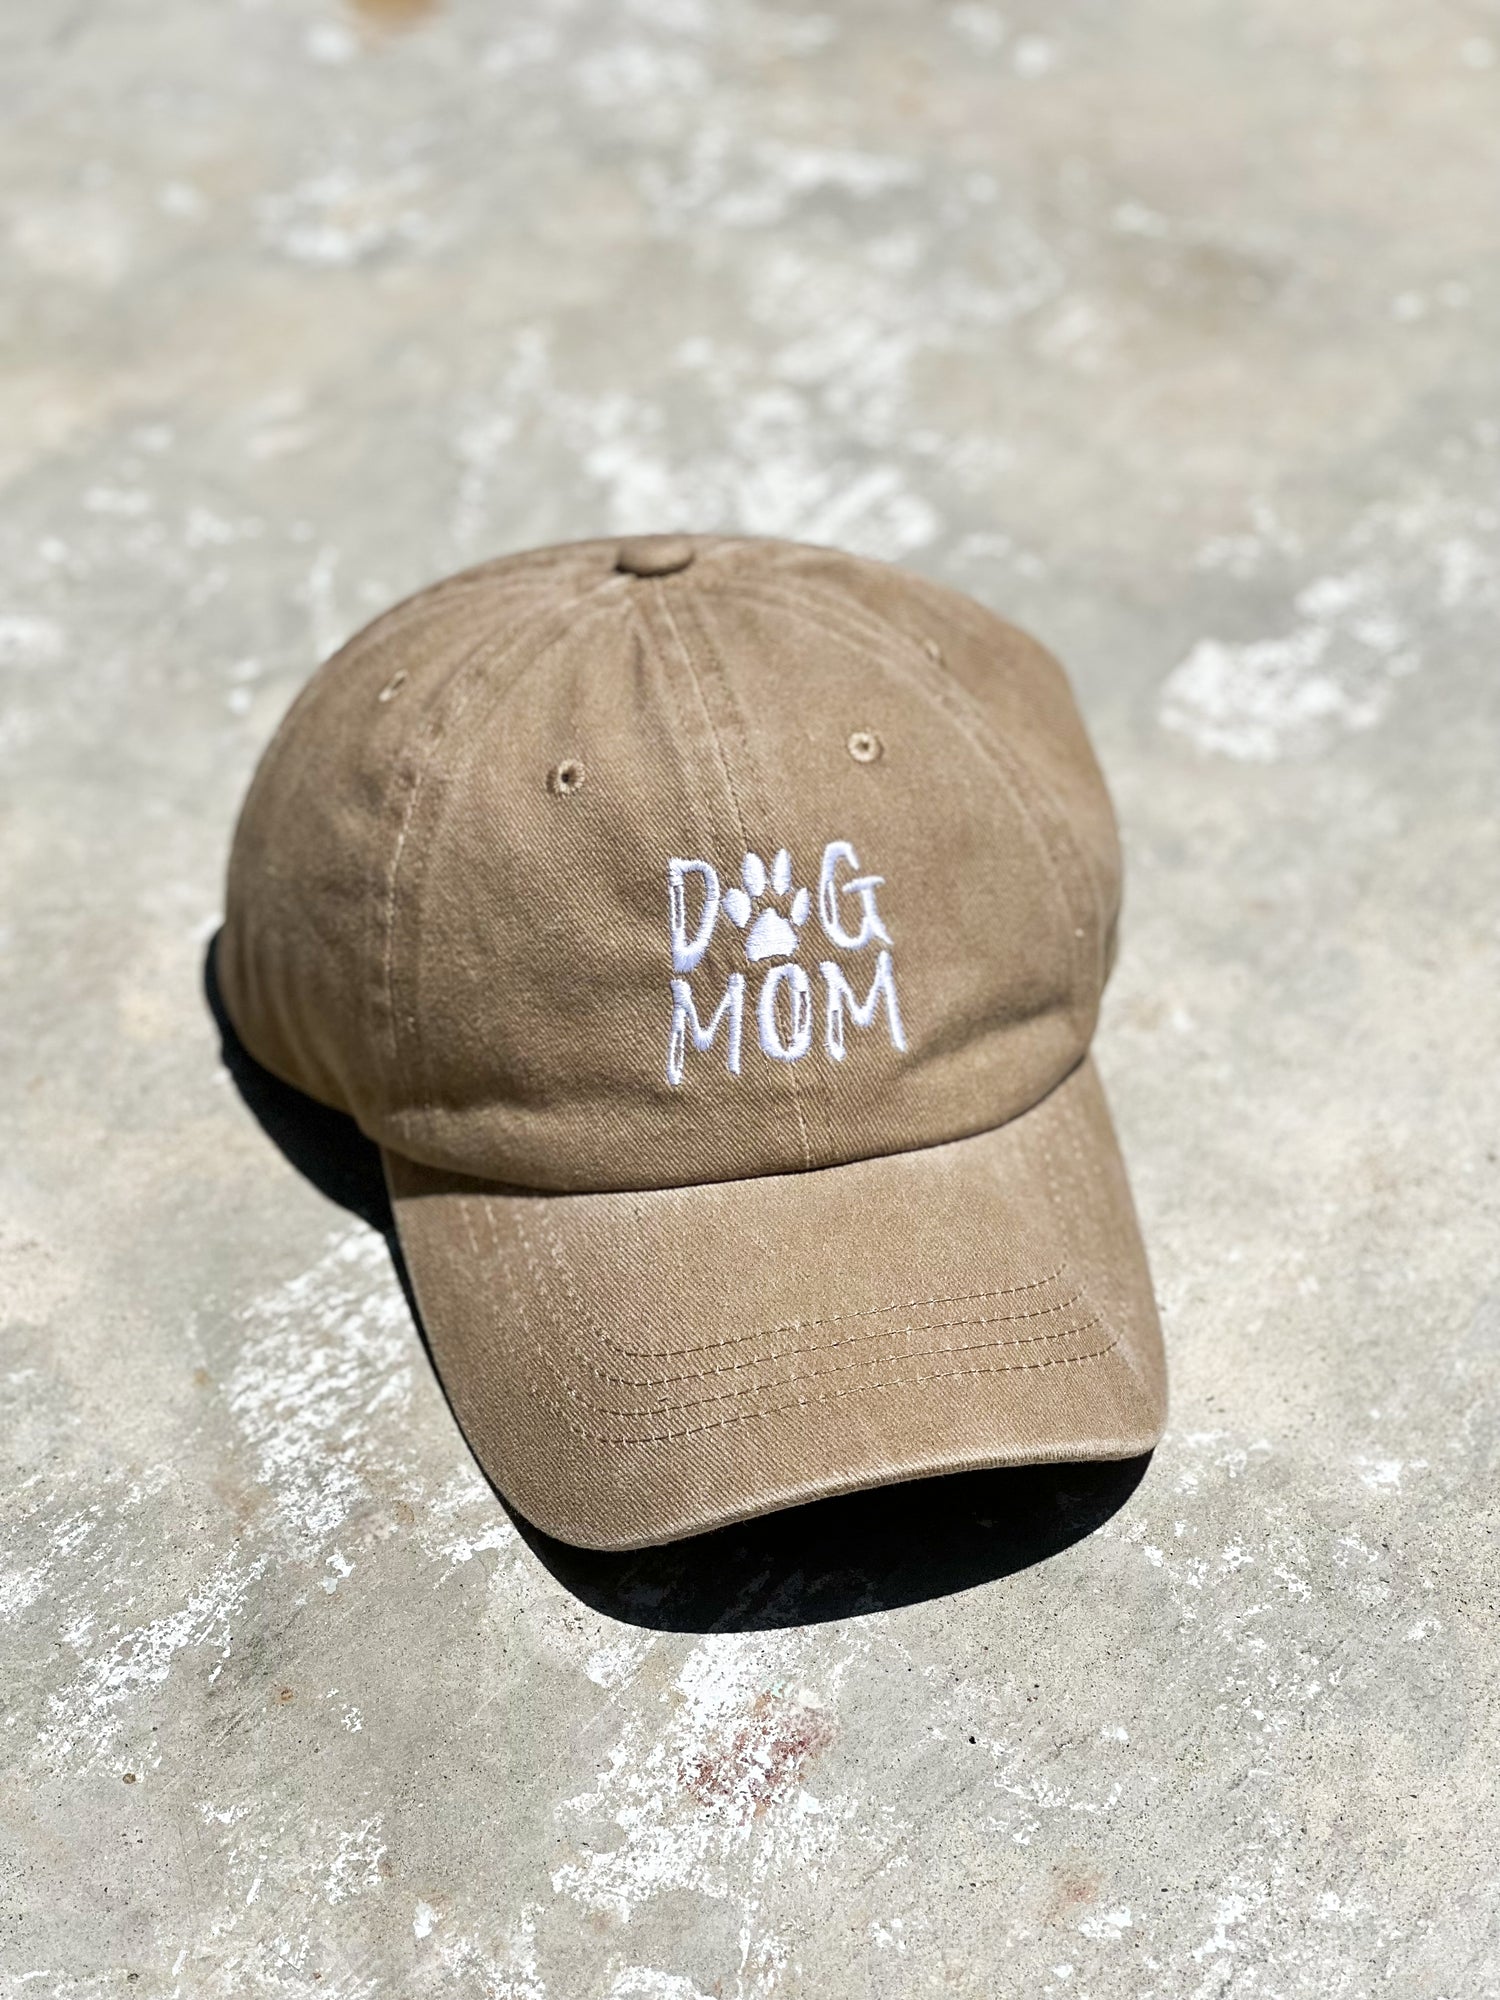 There's a beige baseball distressed cotton cap with "Dog Mom" printed on the front of the cap. It's laying on the gray concrete floor.